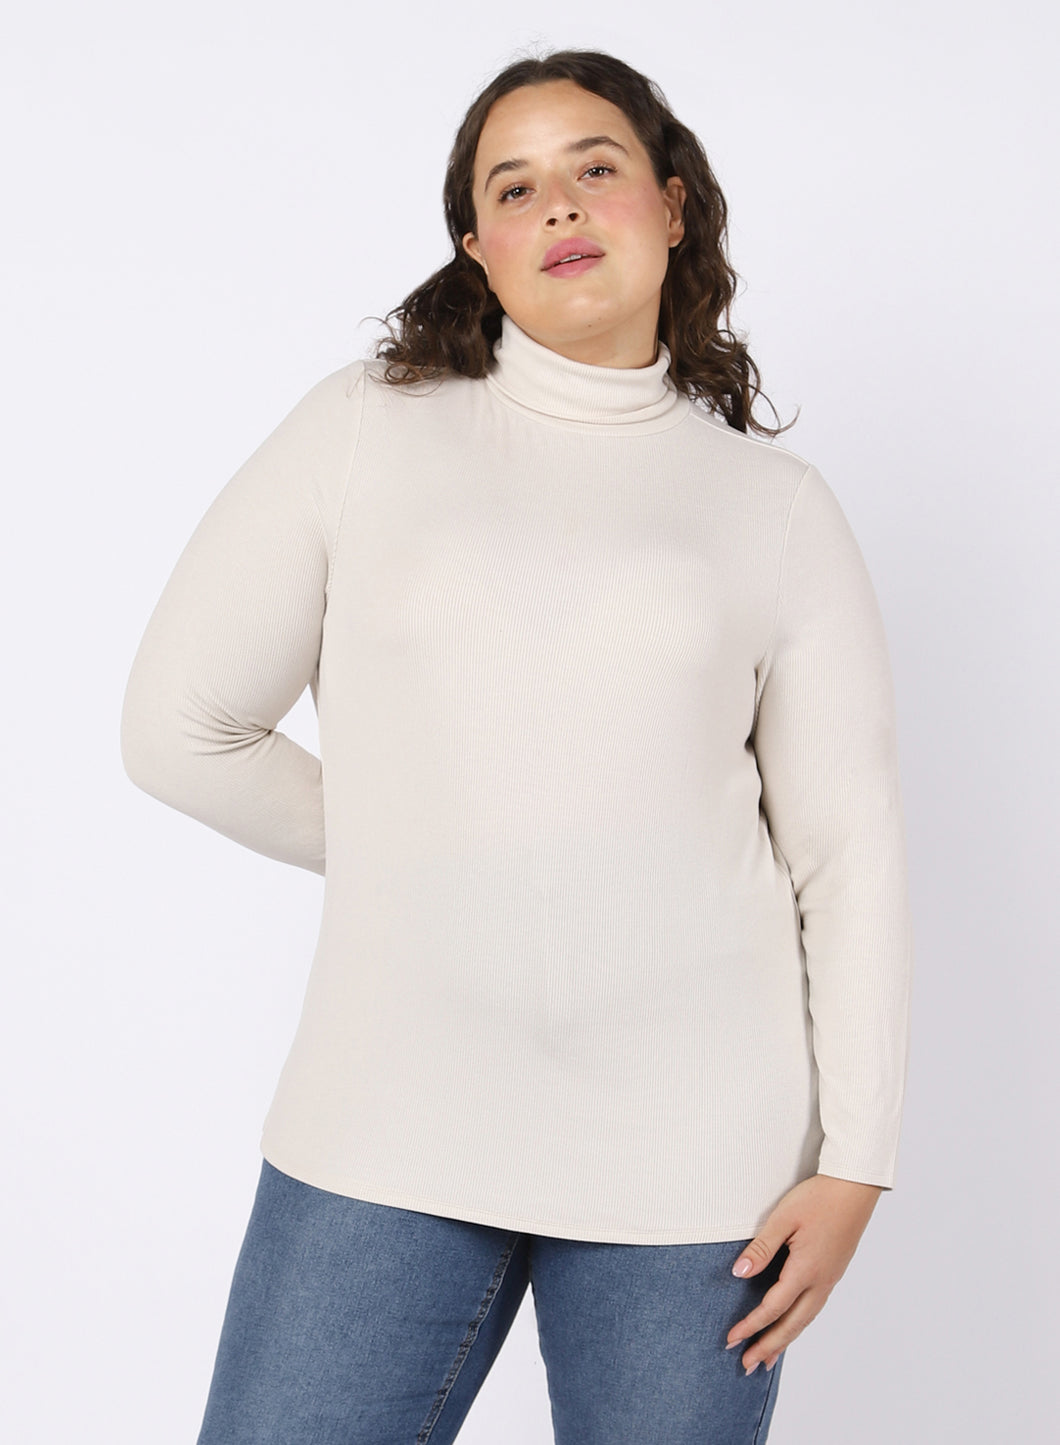 Rib Knit Turtleneck (available in plus sizes)